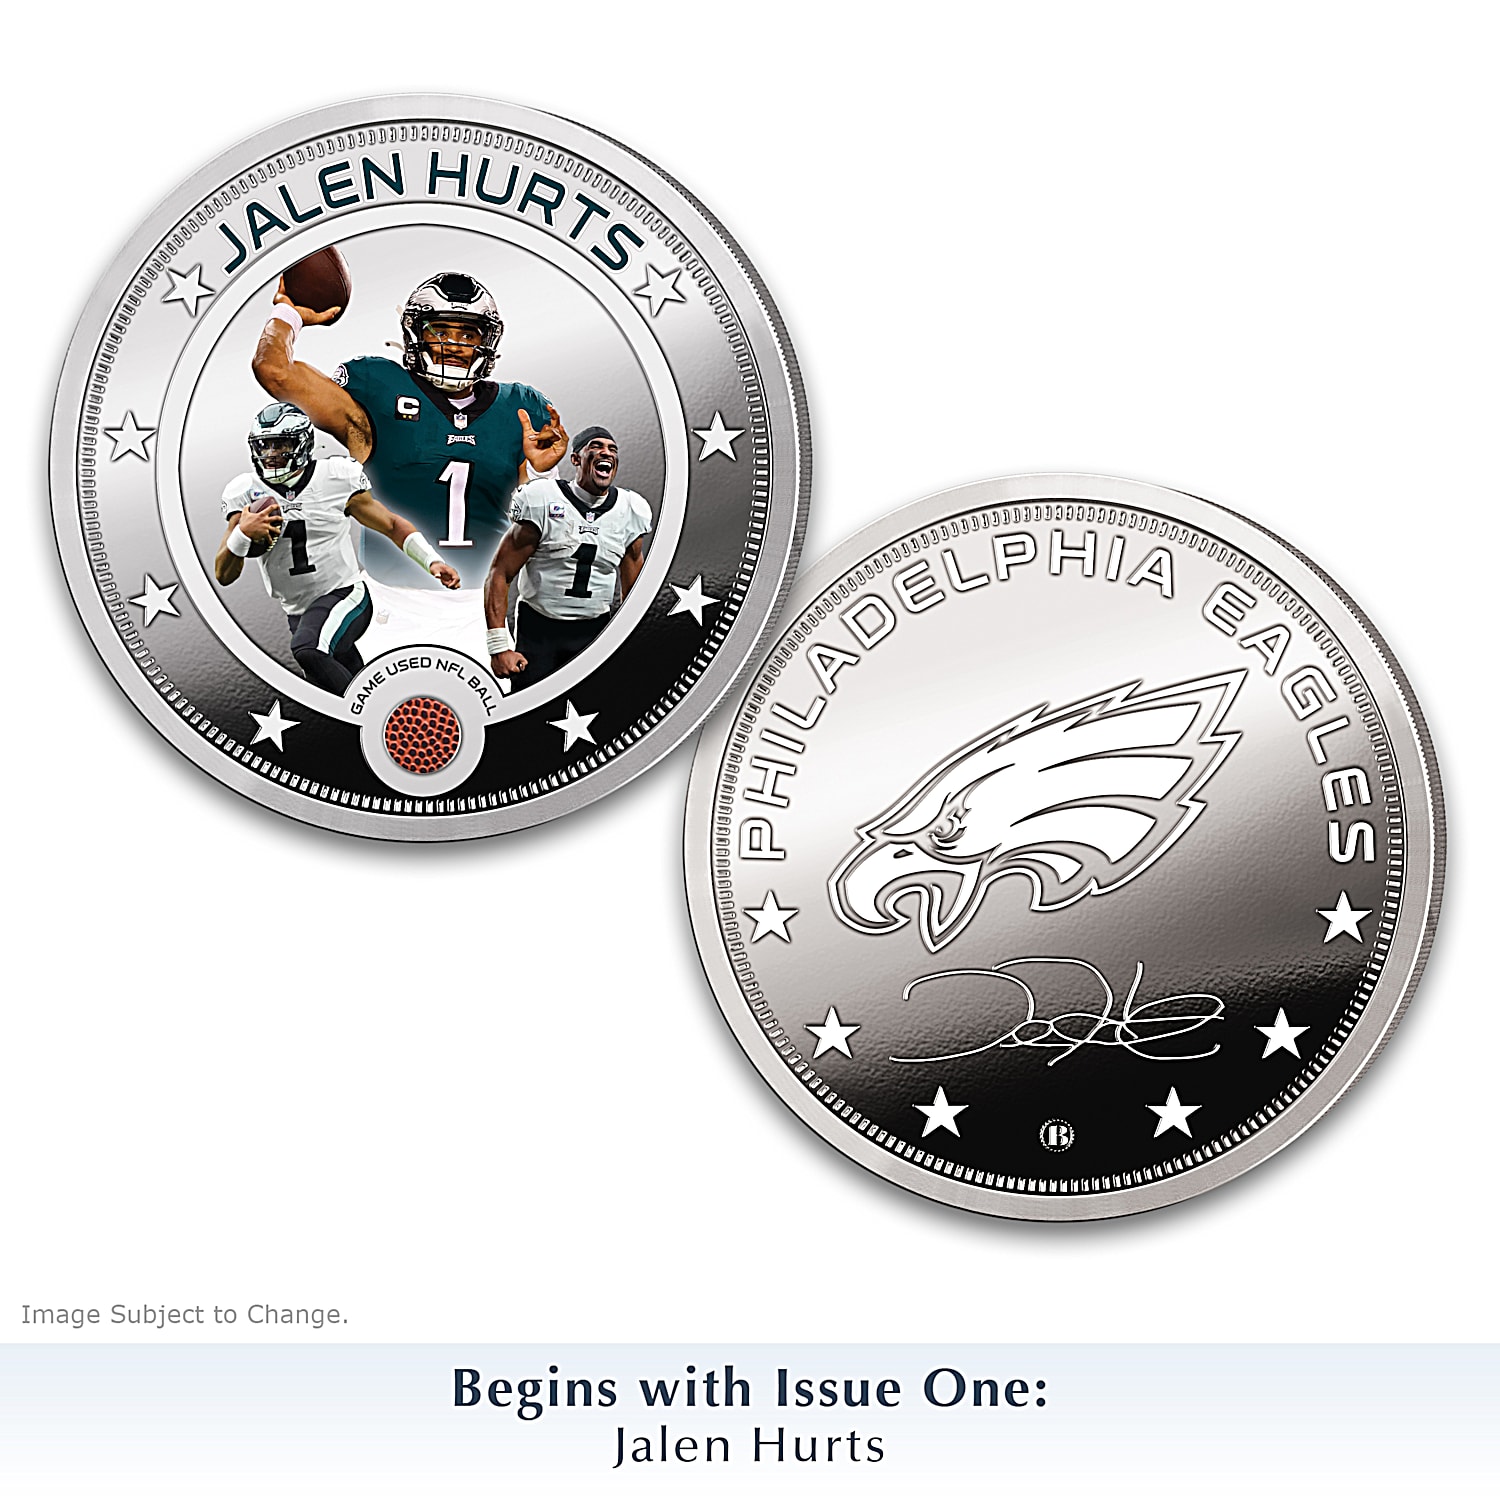 The Philadelphia Eagles Jalen Hurts Silver-Plated NFL Proof